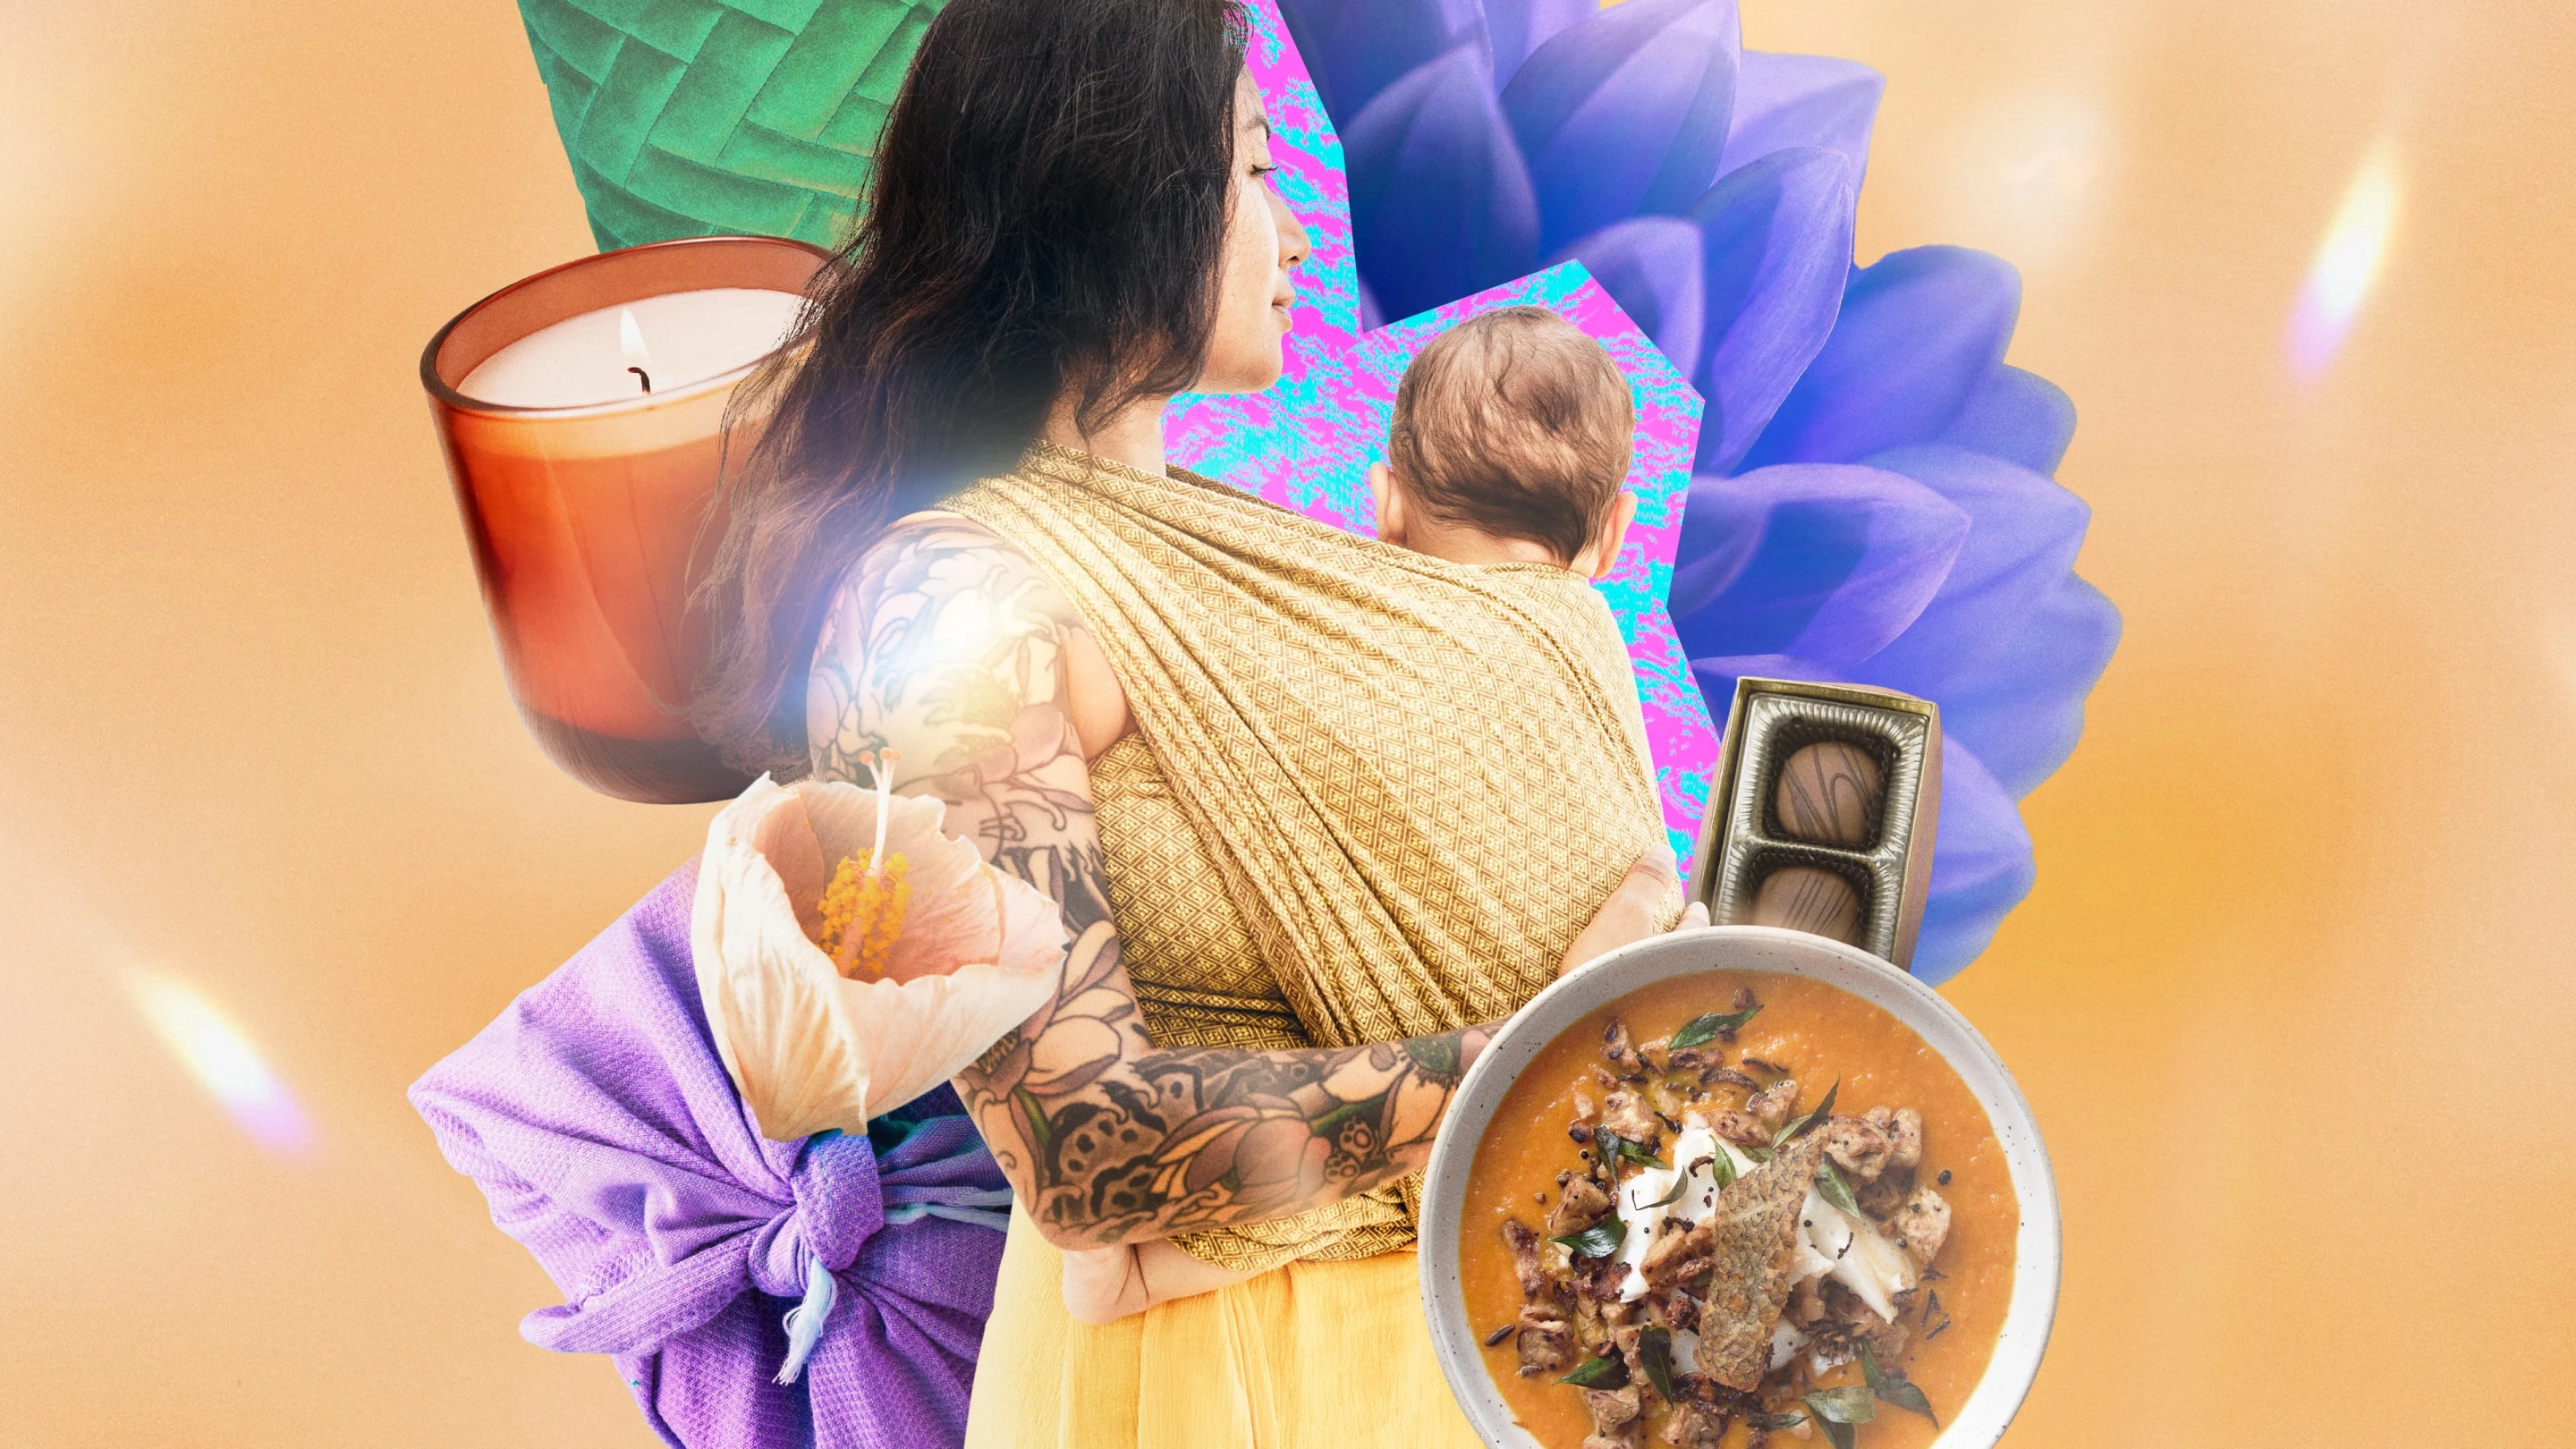 A woman with tattoos carrying a baby with various items collaged around her, including a candle, flower petals, a box of chocolates, soup and blankets.